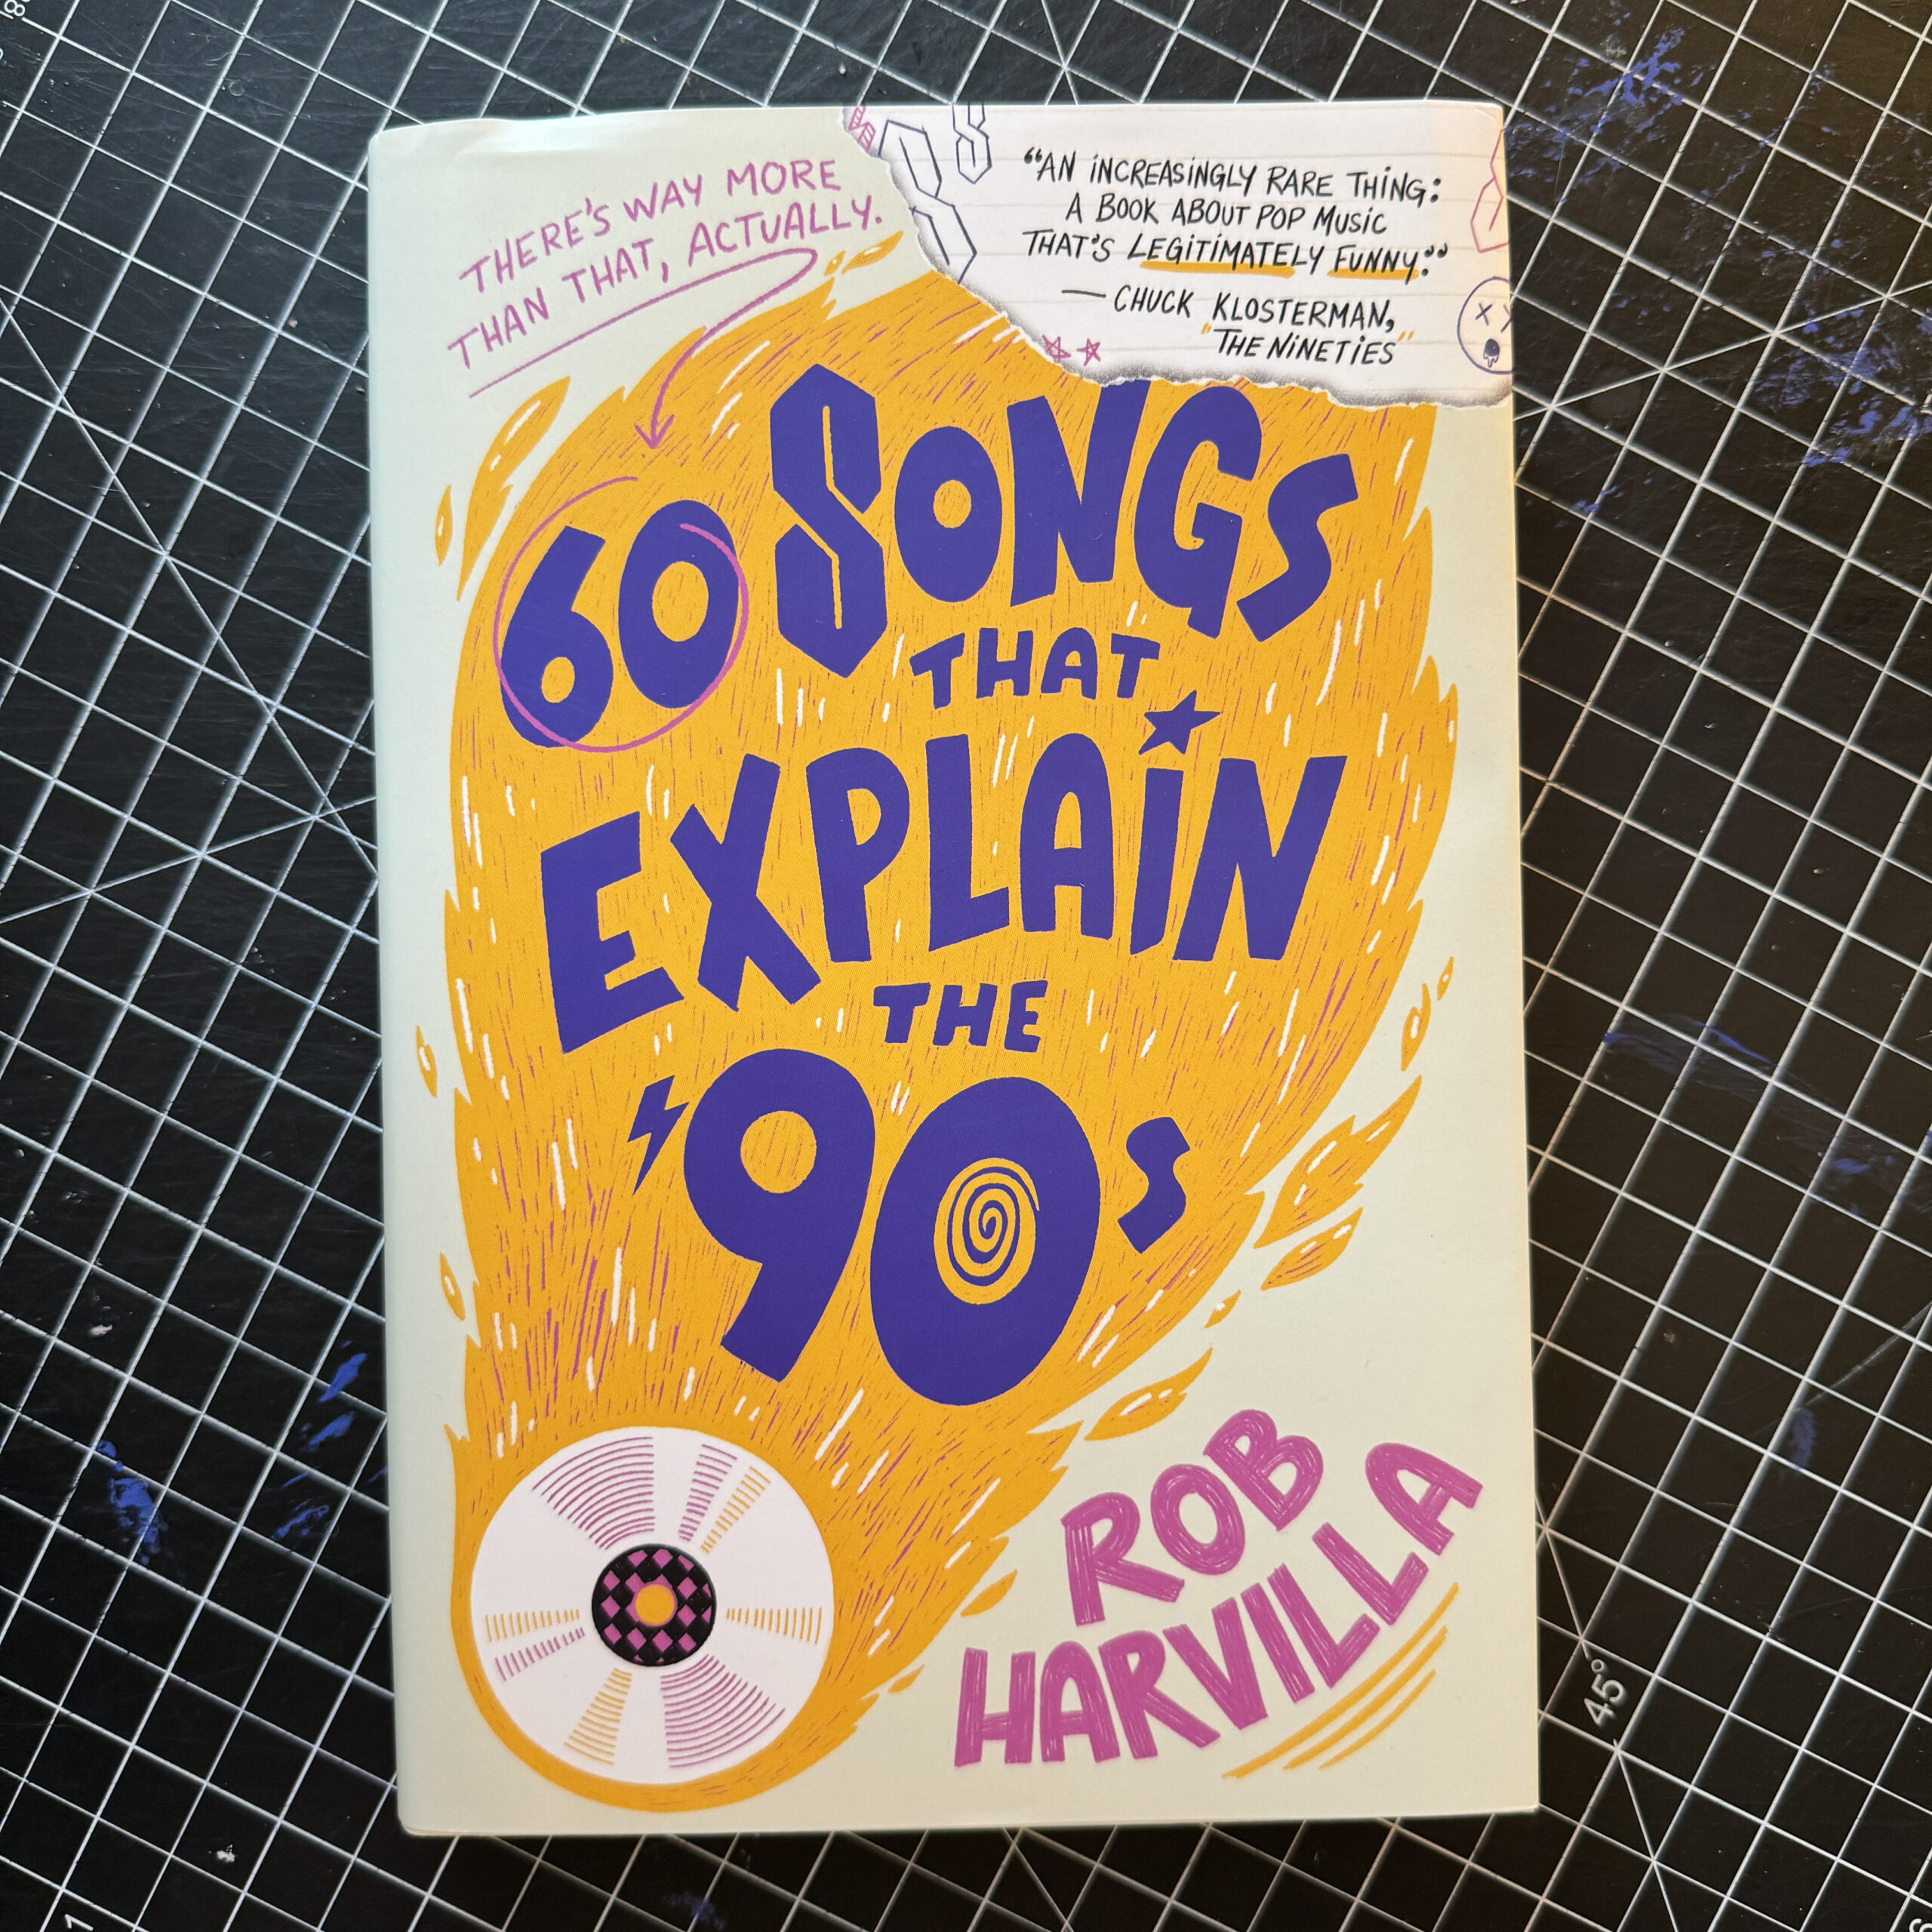 60 Songs That Explain the '90s - Hardcover